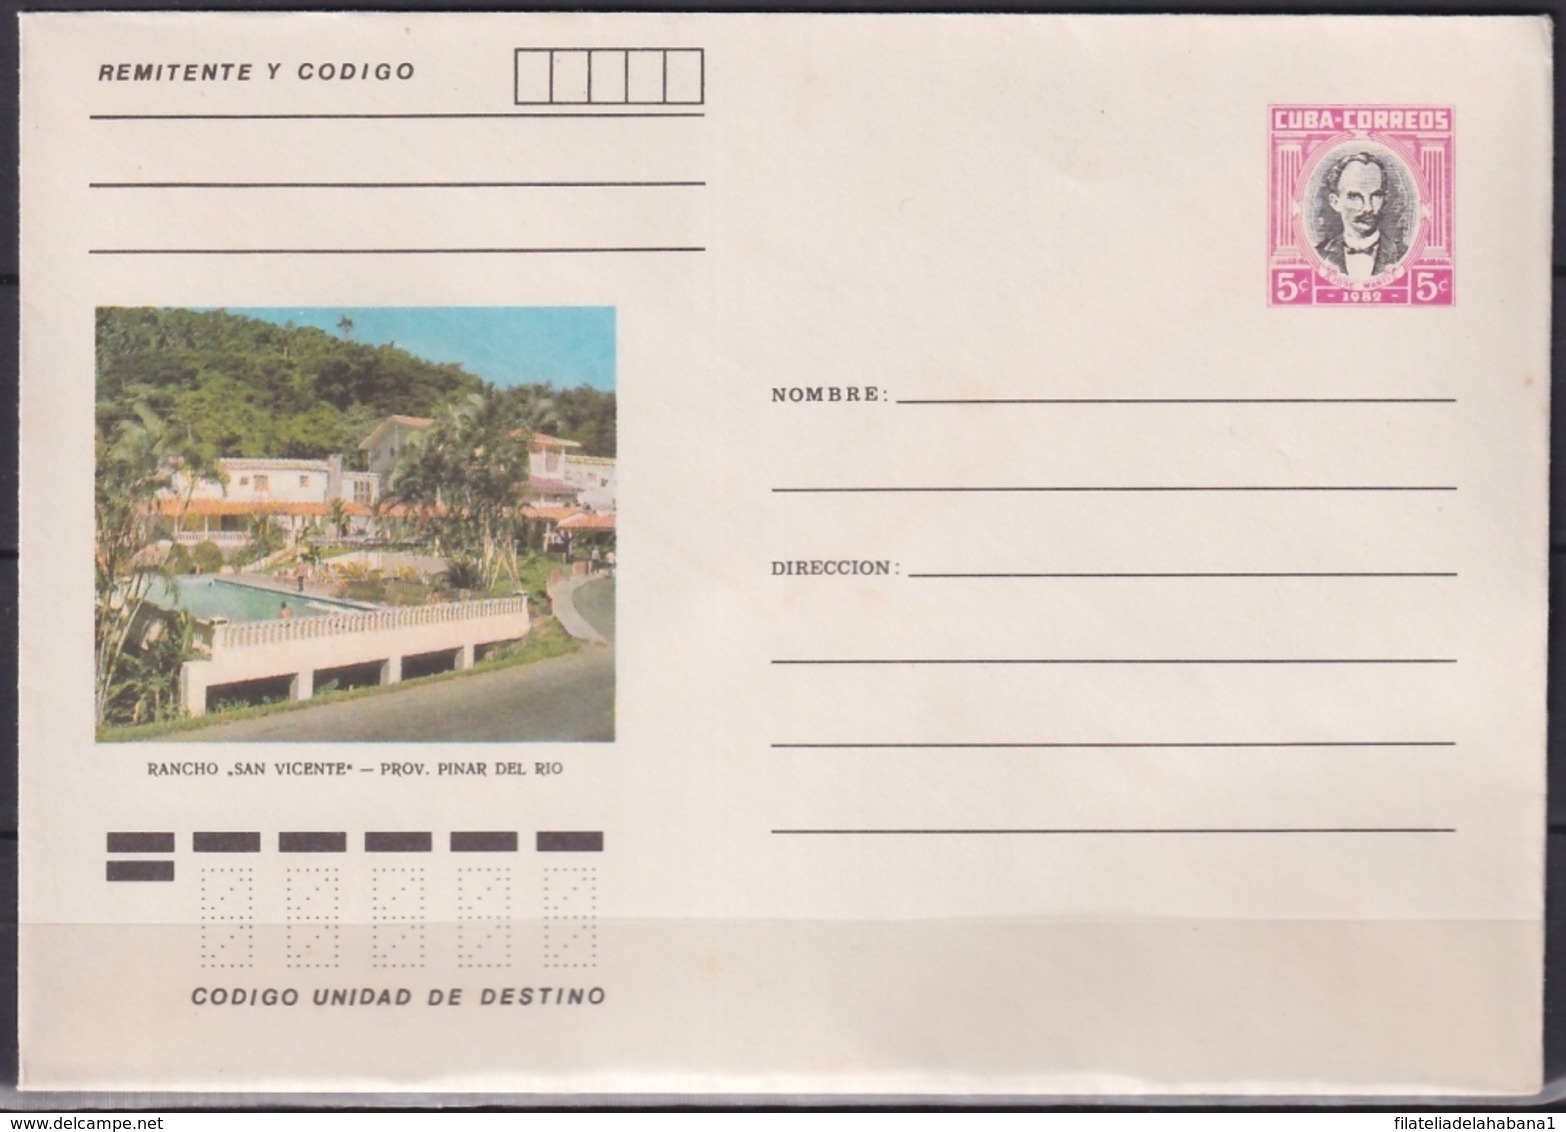 1982-EP-214 CUBA 1982 5c POSTAL STATIONERY COVER. PINAR DEL RIO, RANCHO SAN VICENTE. - Covers & Documents